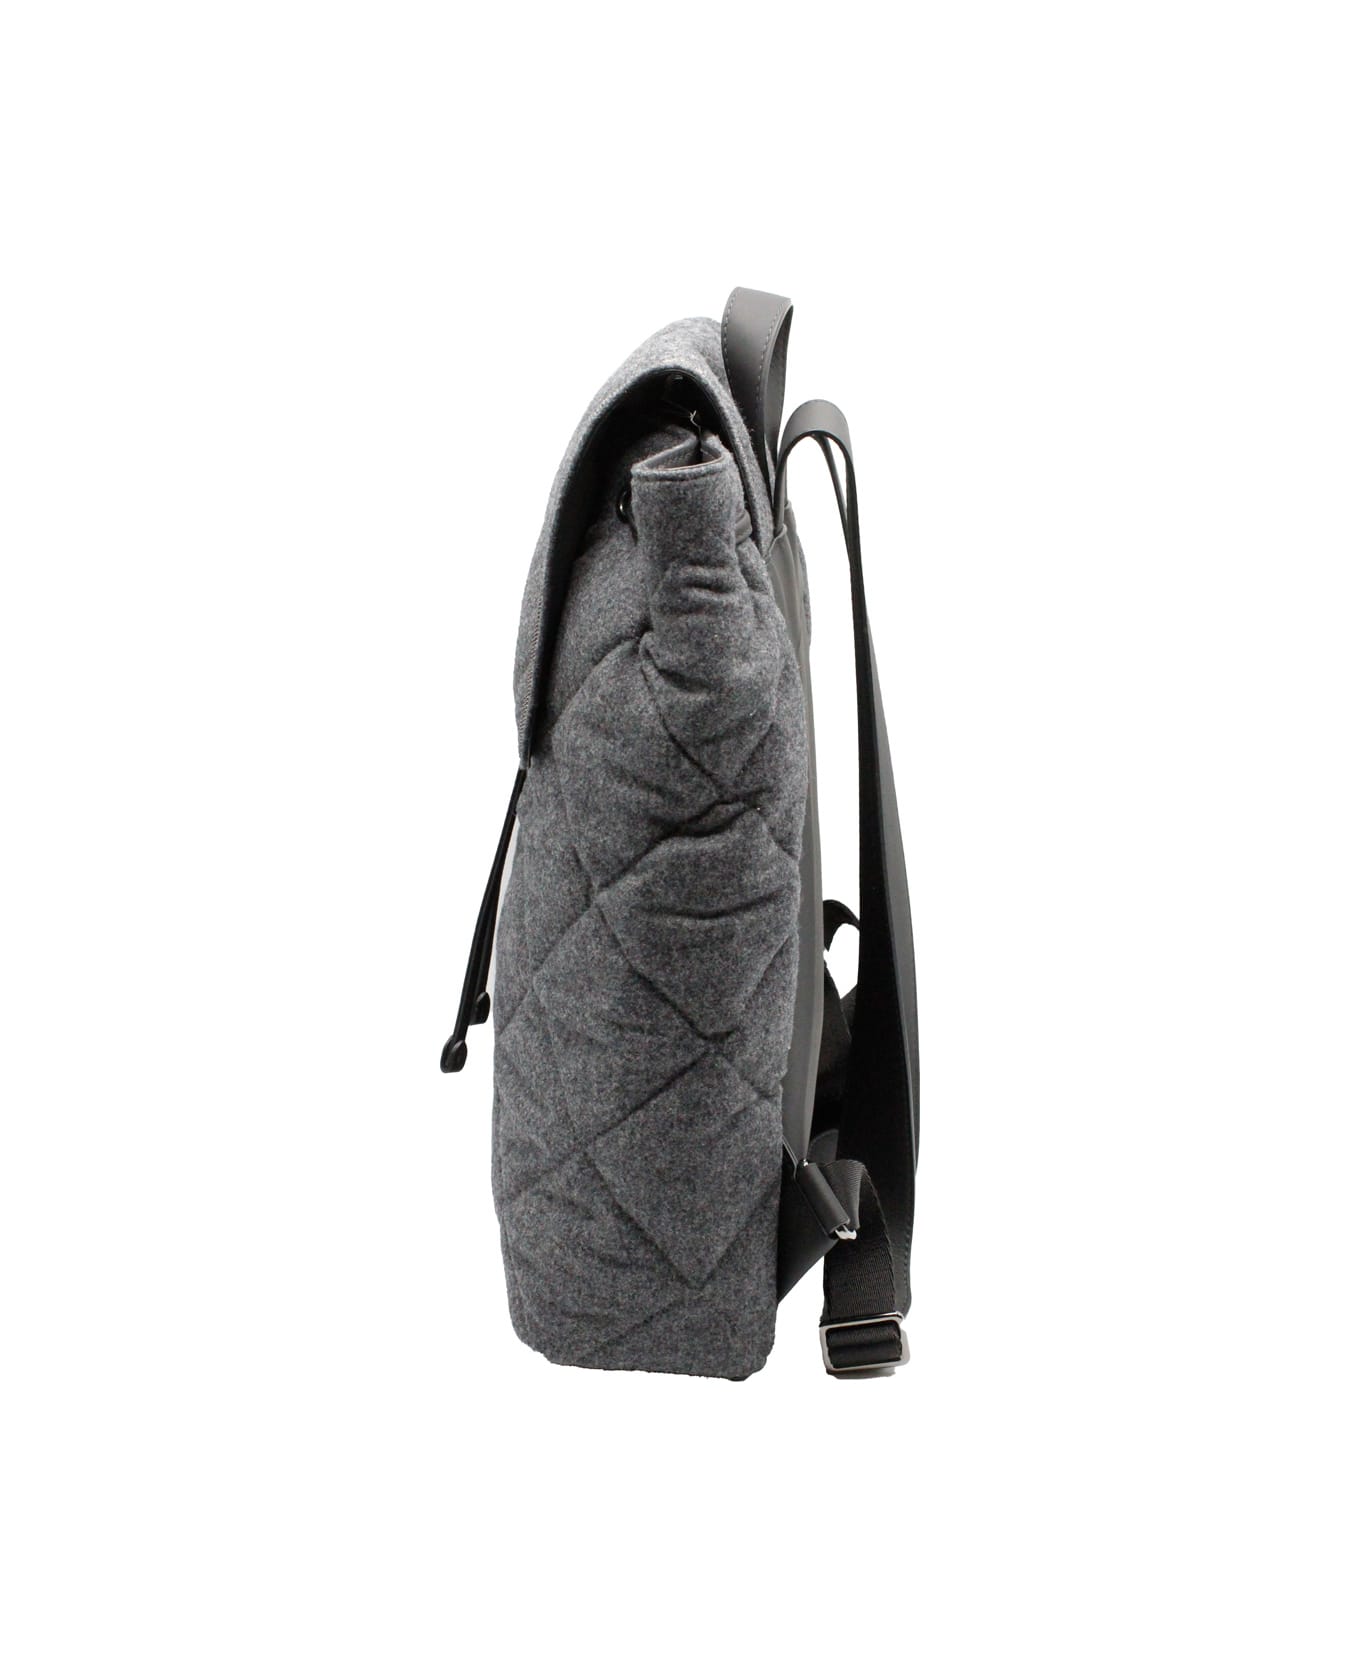 Brunello Cucinelli Backpack With Diamond Pattern In Wool And Leather Embellished With Rows Of Jewels - Grey バックパック